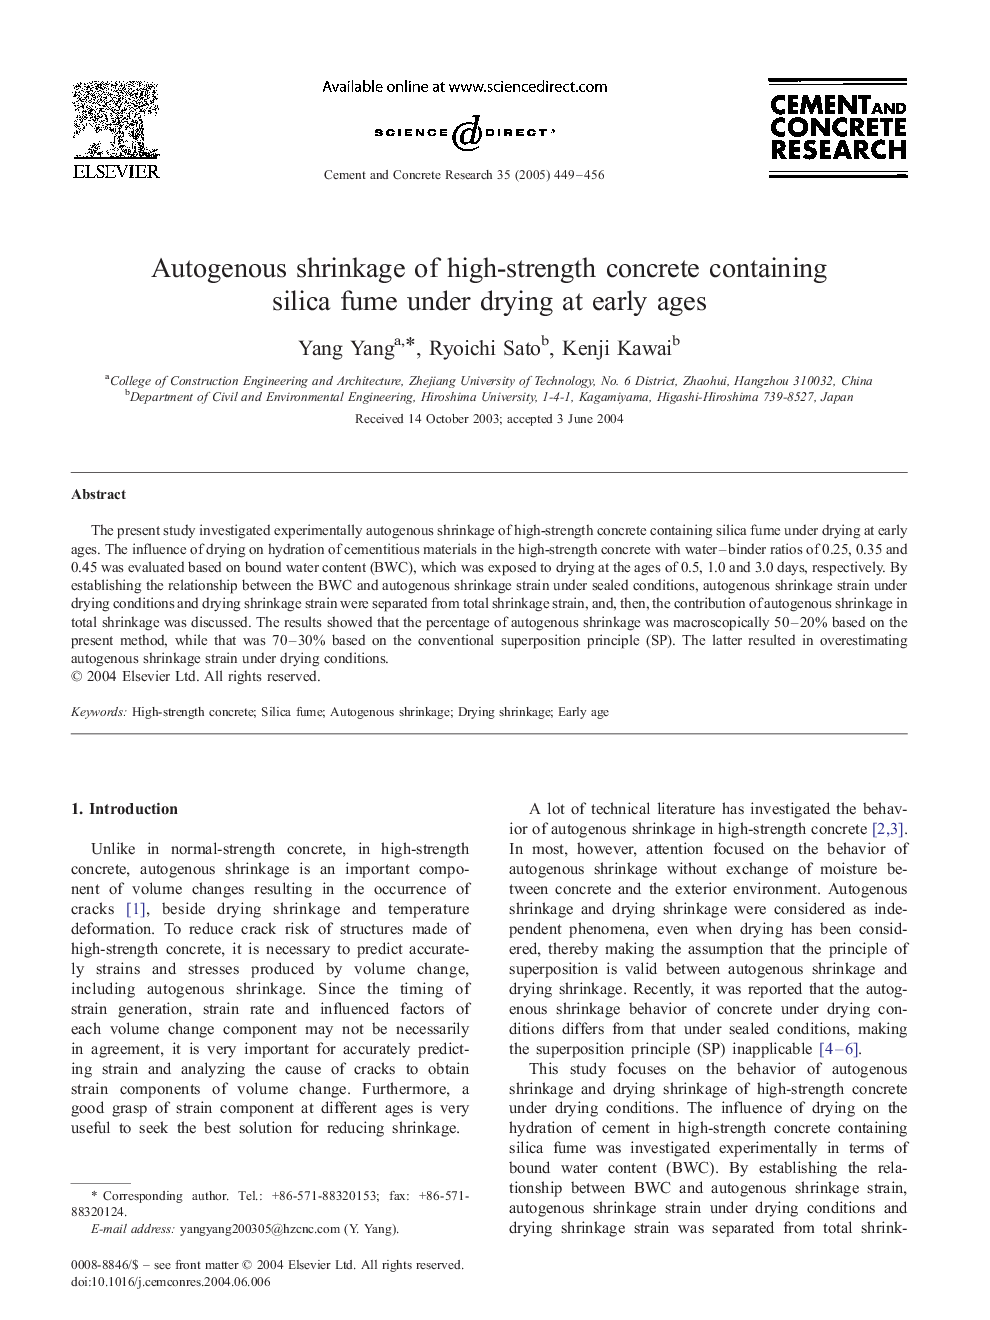 Autogenous shrinkage of high-strength concrete containing silica fume under drying at early ages